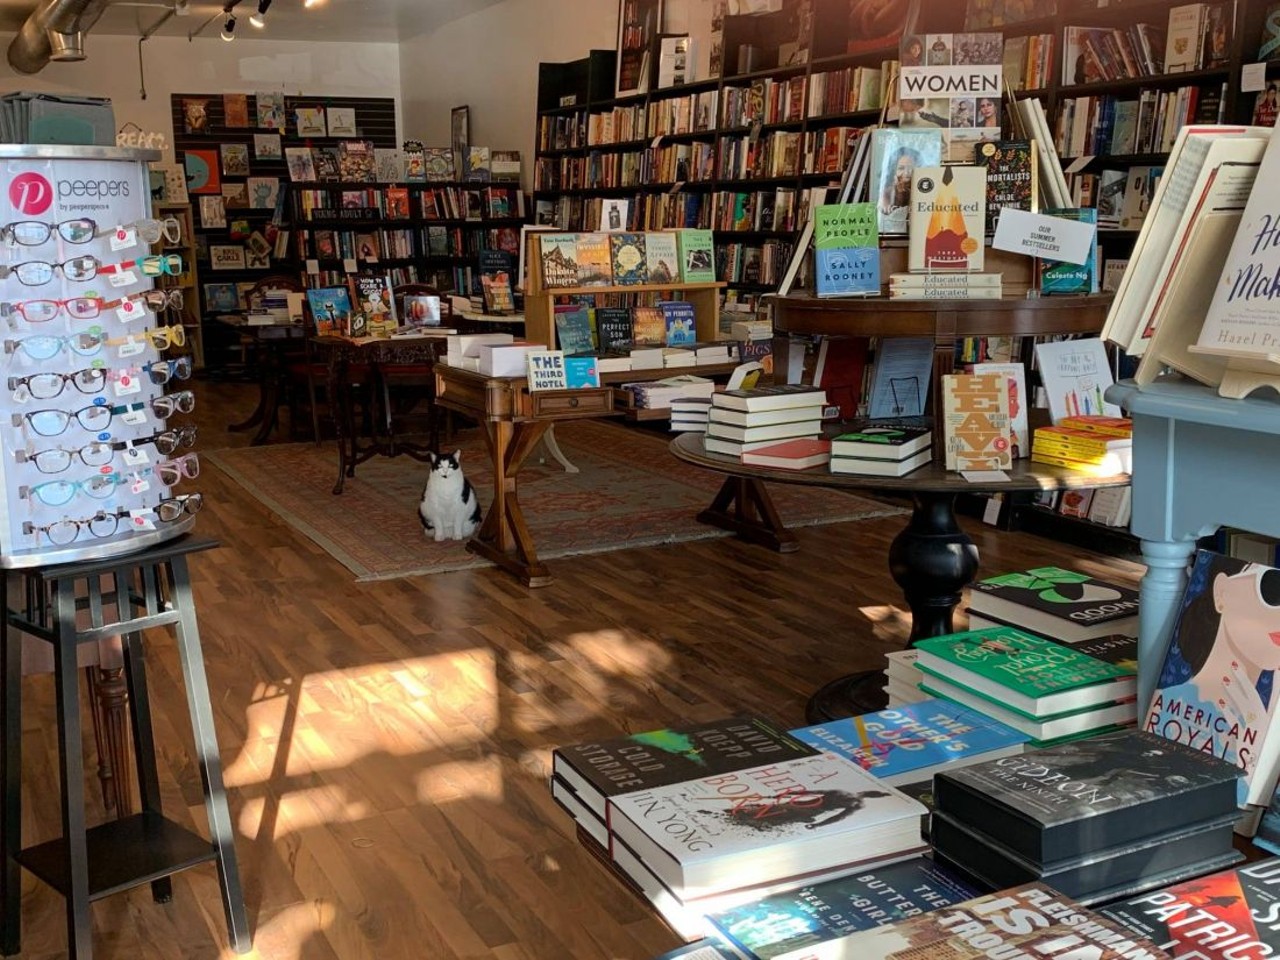 Pages Bookshop
19560 Grand River Ave., Detroit; 313-473-7342; pagesbkshop.com 
This new-ish indie bookstore in Detroit&#146;s historic Grandmont-Rosedale neighborhood boasts a carefully curated collection of books from and about Detroit, and frequently hosts intimate readings from nationally acclaimed authors. Pro tip: Ask shop cat Pip for suggestions when things return to normal. In the meantime, Pages is offering online and phone orders, as well as curbside pickup, and local delivery. 
Photo viaPages Bookshop.Facebook